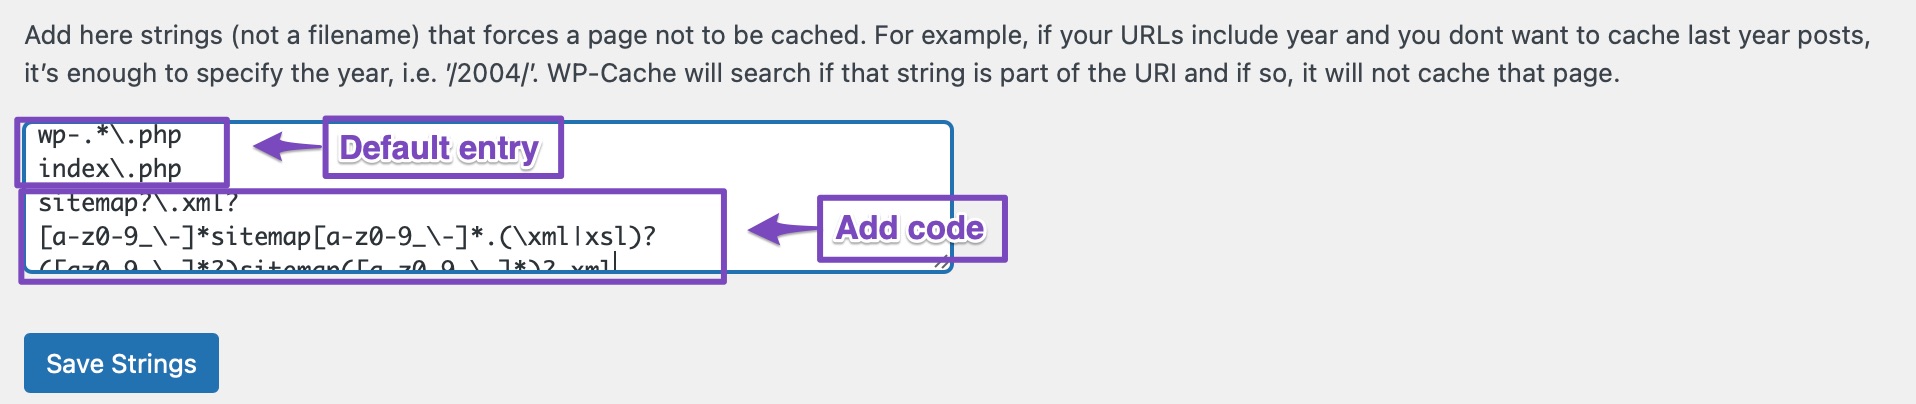 Add Code Snippet To WP Super Cache